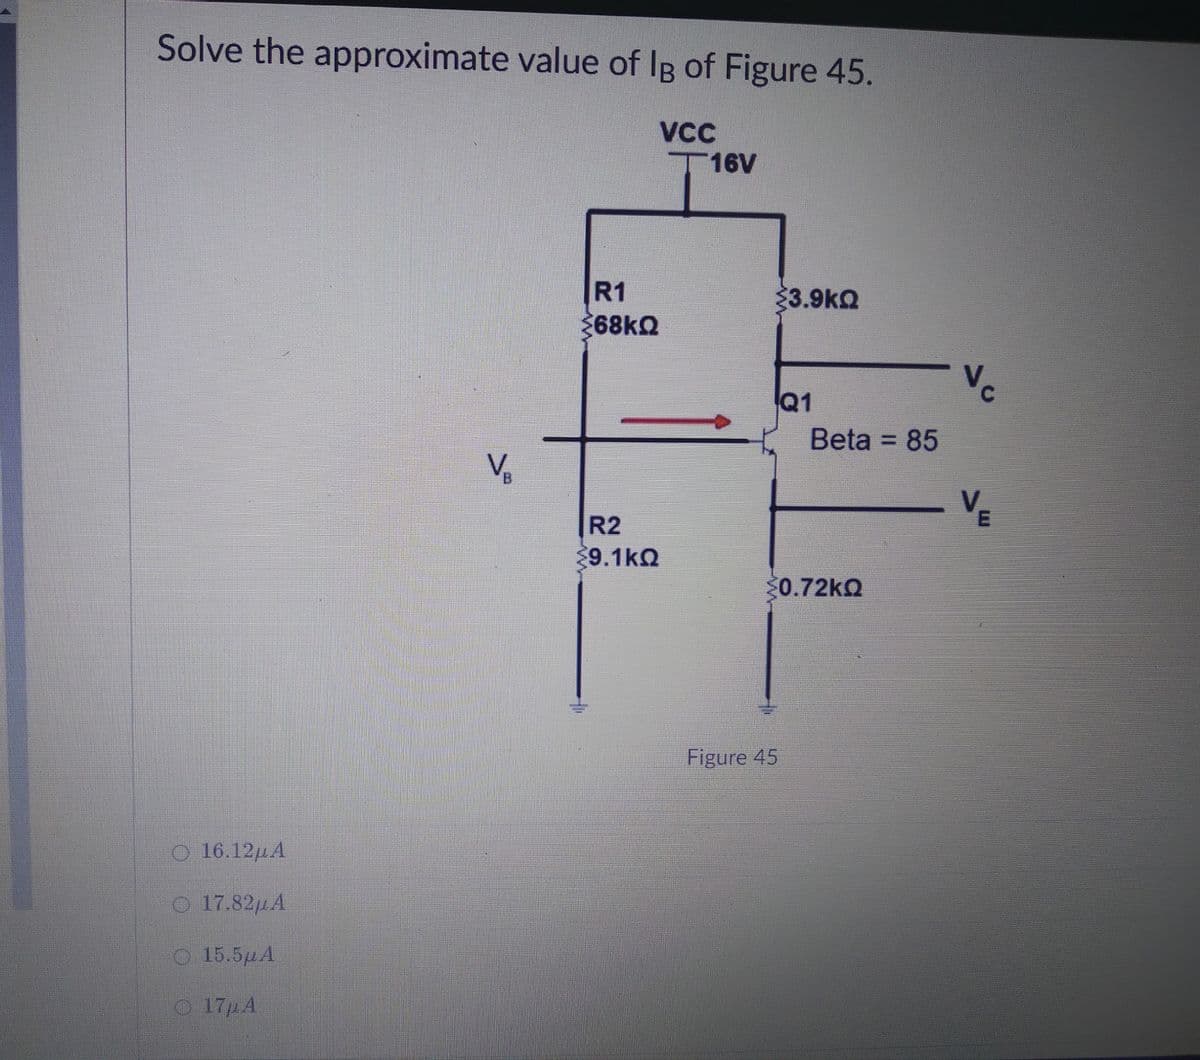 Solve the approximate value of IB of Figure 45.
VCC
T16V
R1
33.9kQ
68kQ
Vc
Q1
Beta = 85
%3D
R2
9.1kQ
0.72KQ
Figure 45
O 16.12HA
O 17.82µA
O 15.5µA
O 17µA
